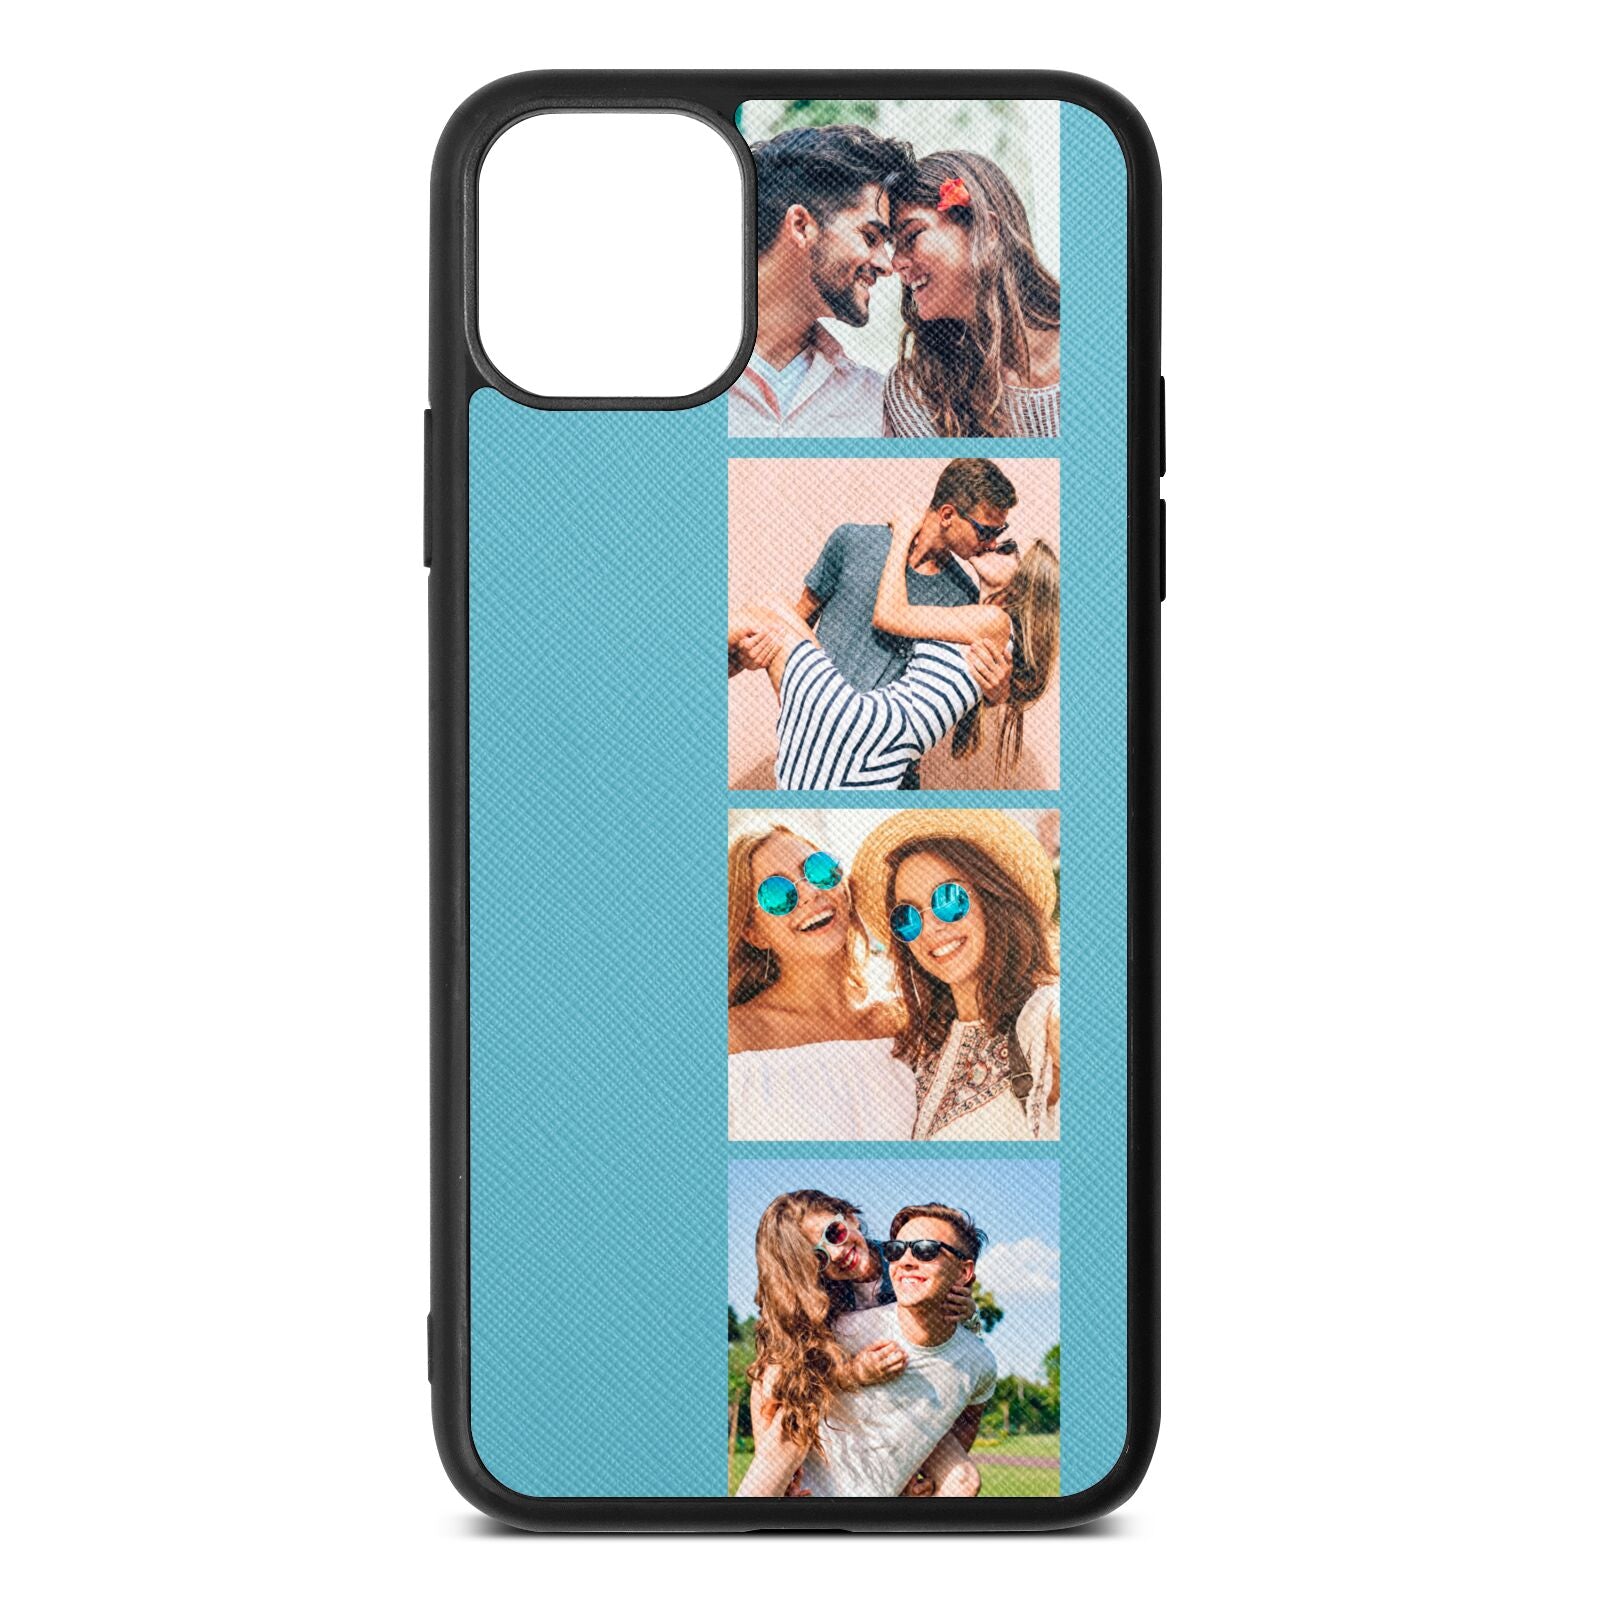 Photo Strip Montage Upload Sky Saffiano Leather iPhone 11 Pro Max Case